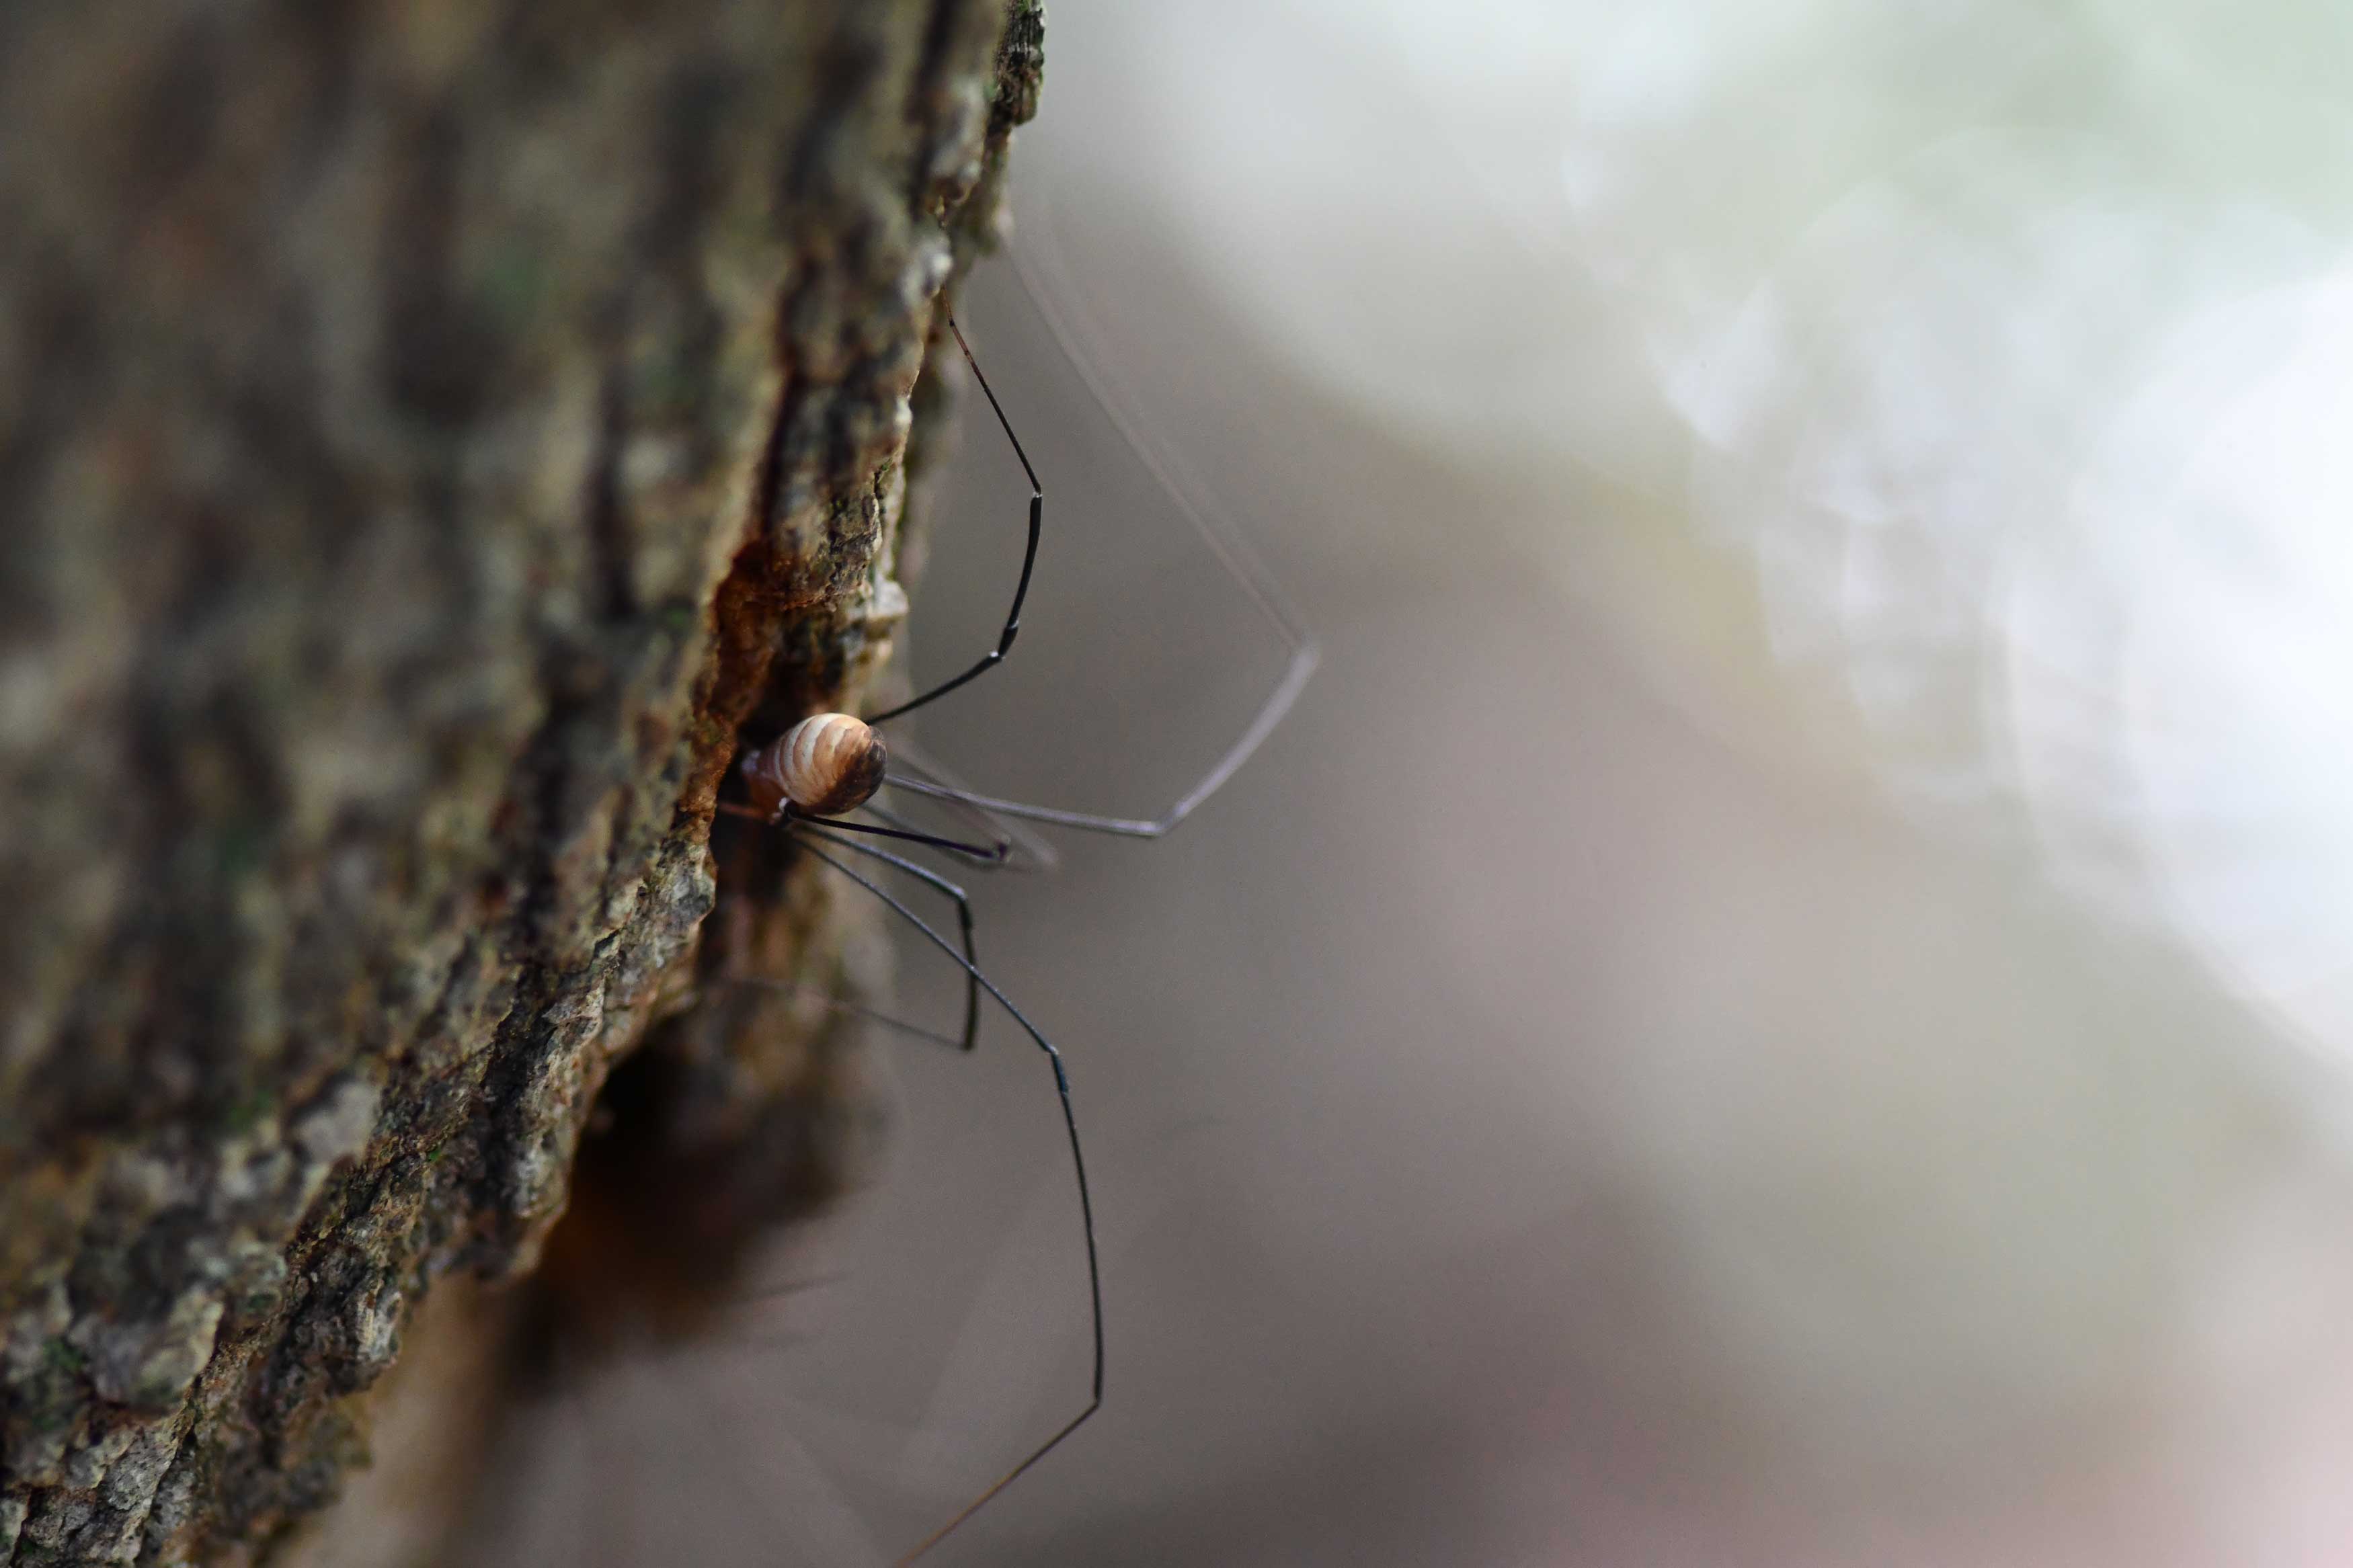 A harvestman and its long legs walk on a tree trunk.